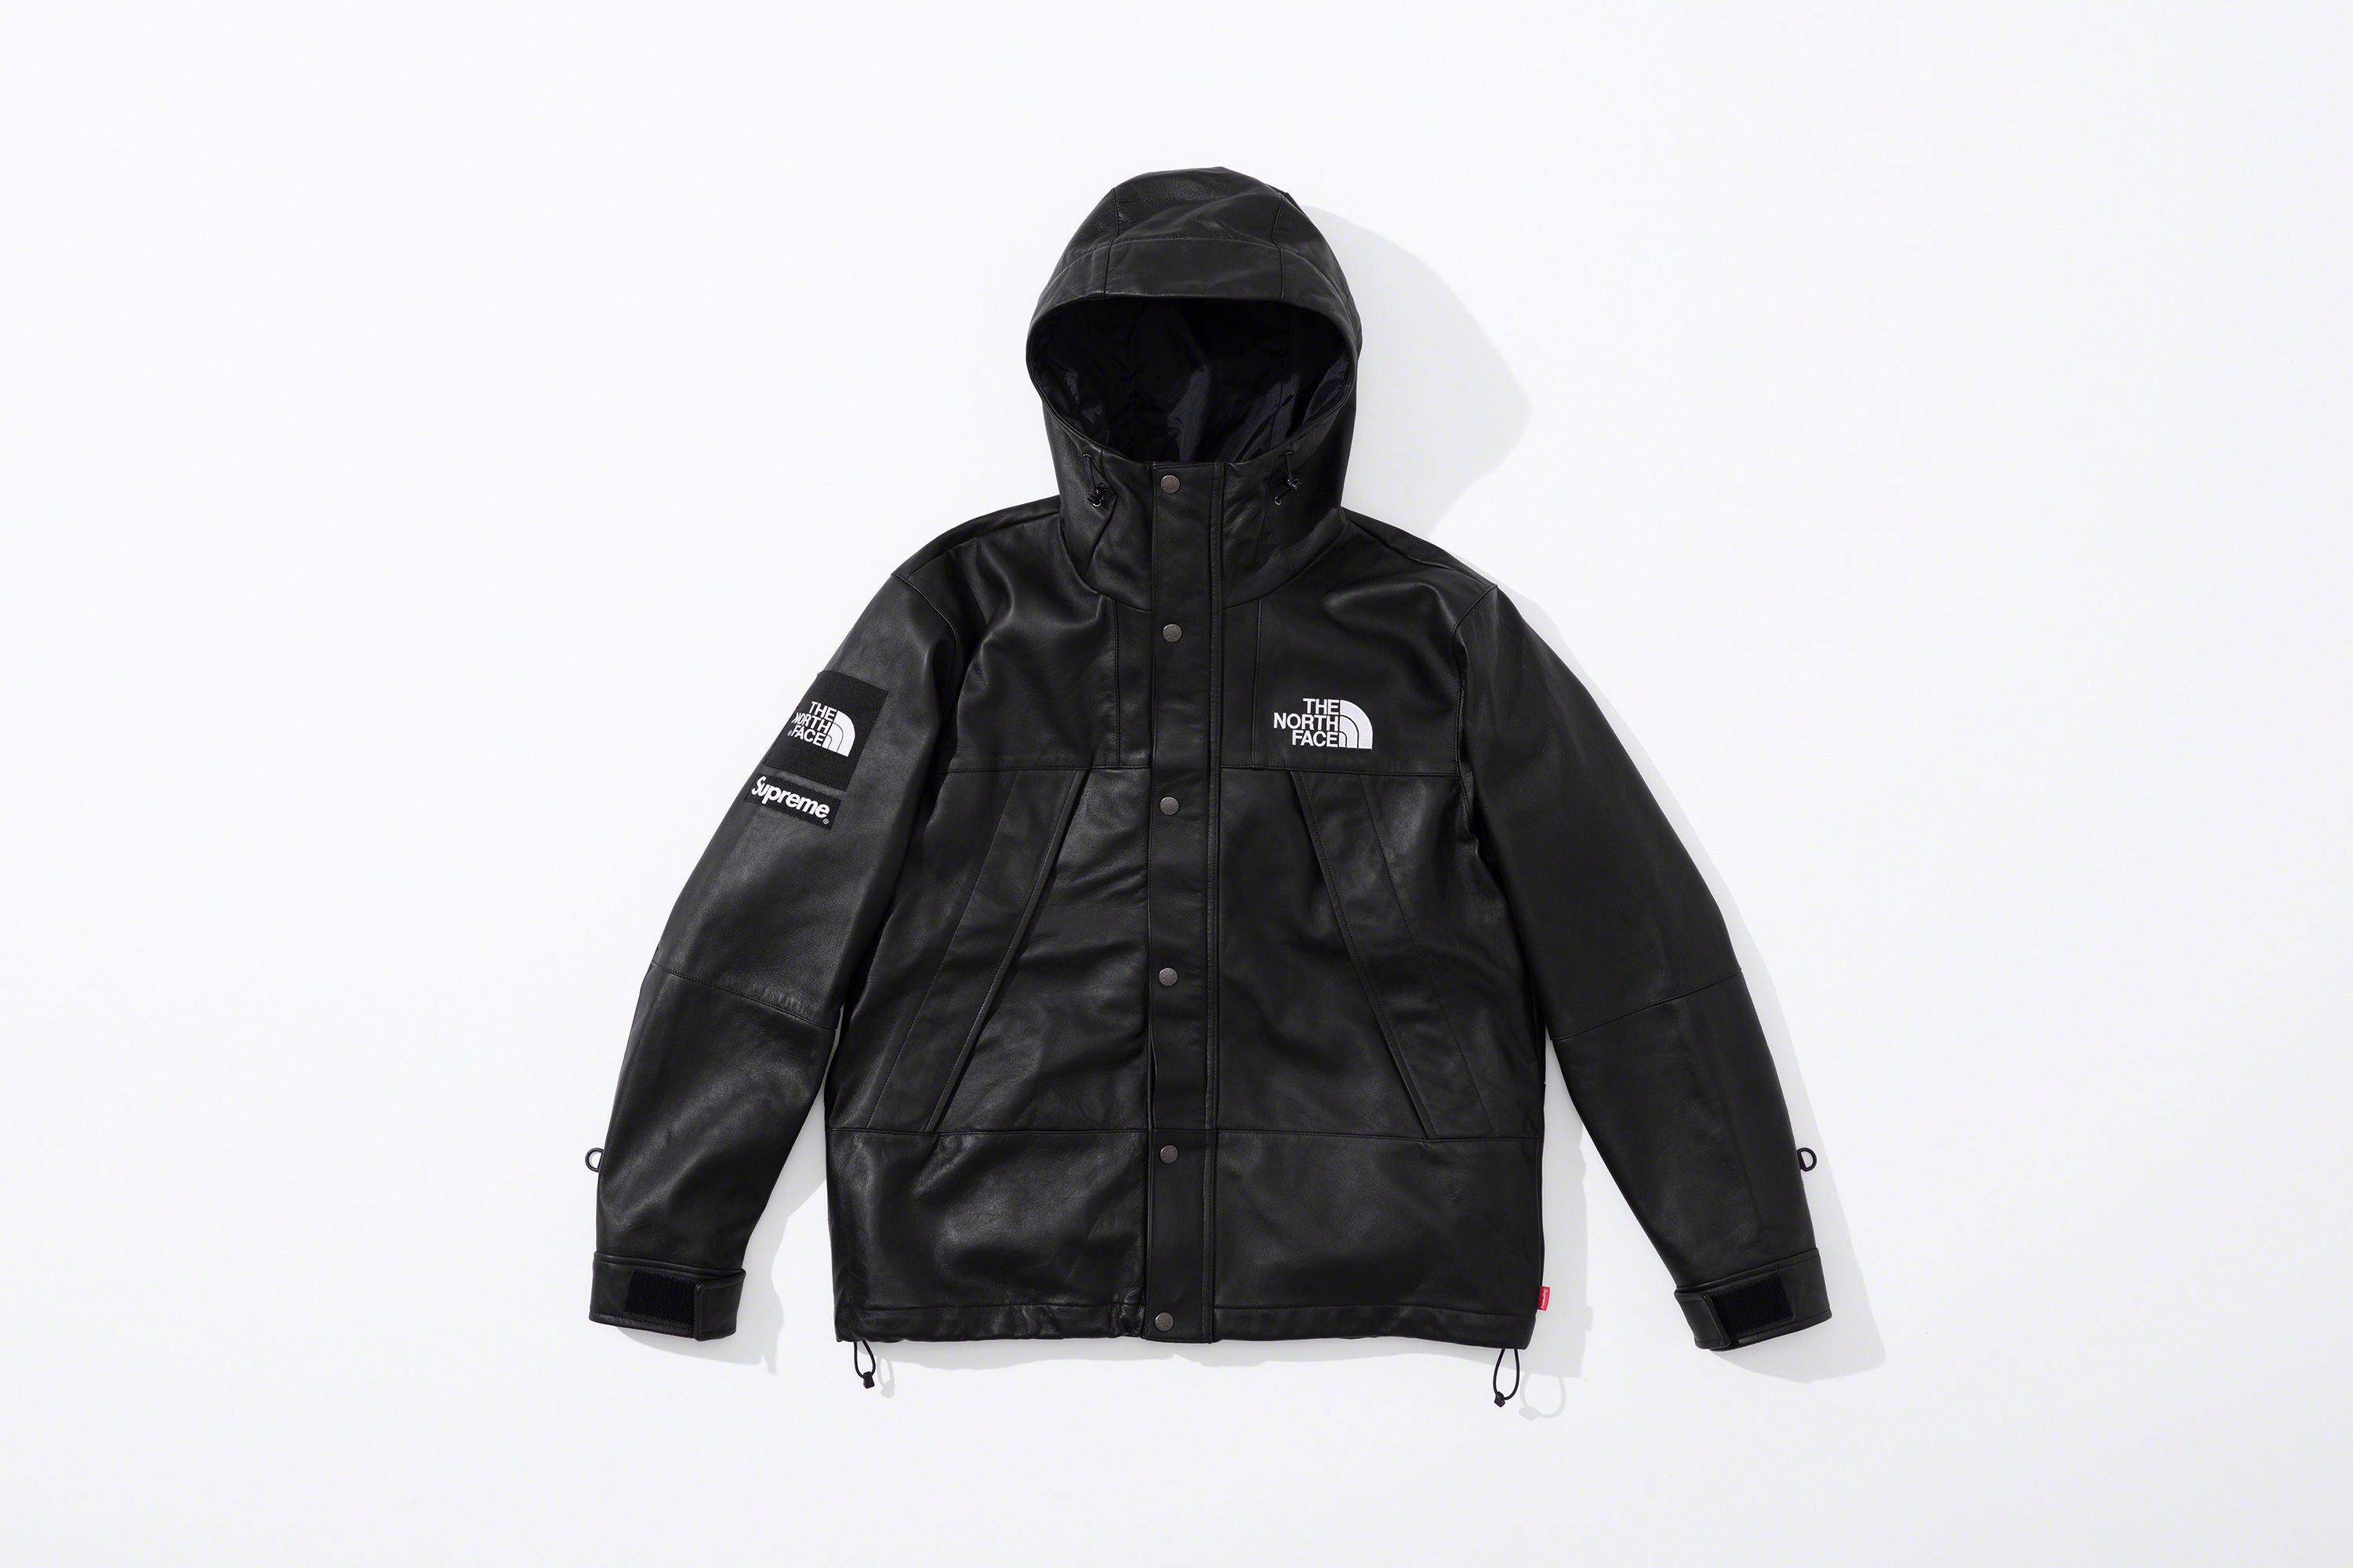 Supreme and The North Face Collaboration Brings Streetwear Vibe to